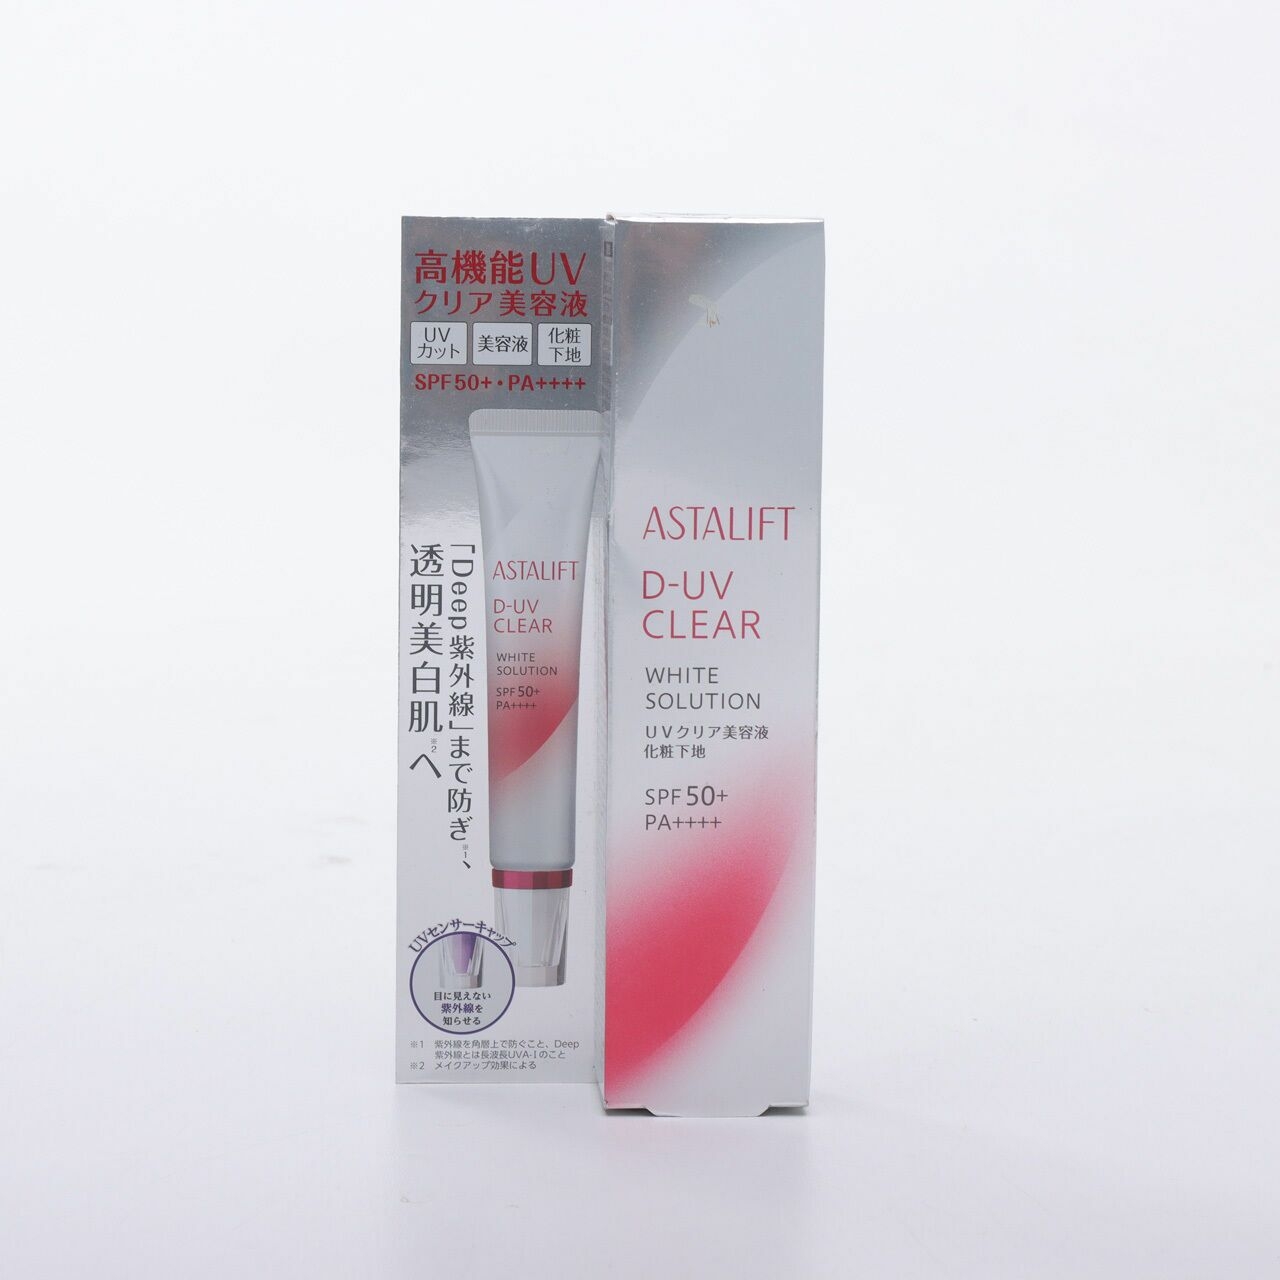 Private Collection Astalift D-UV Clear White Solution Skin Care